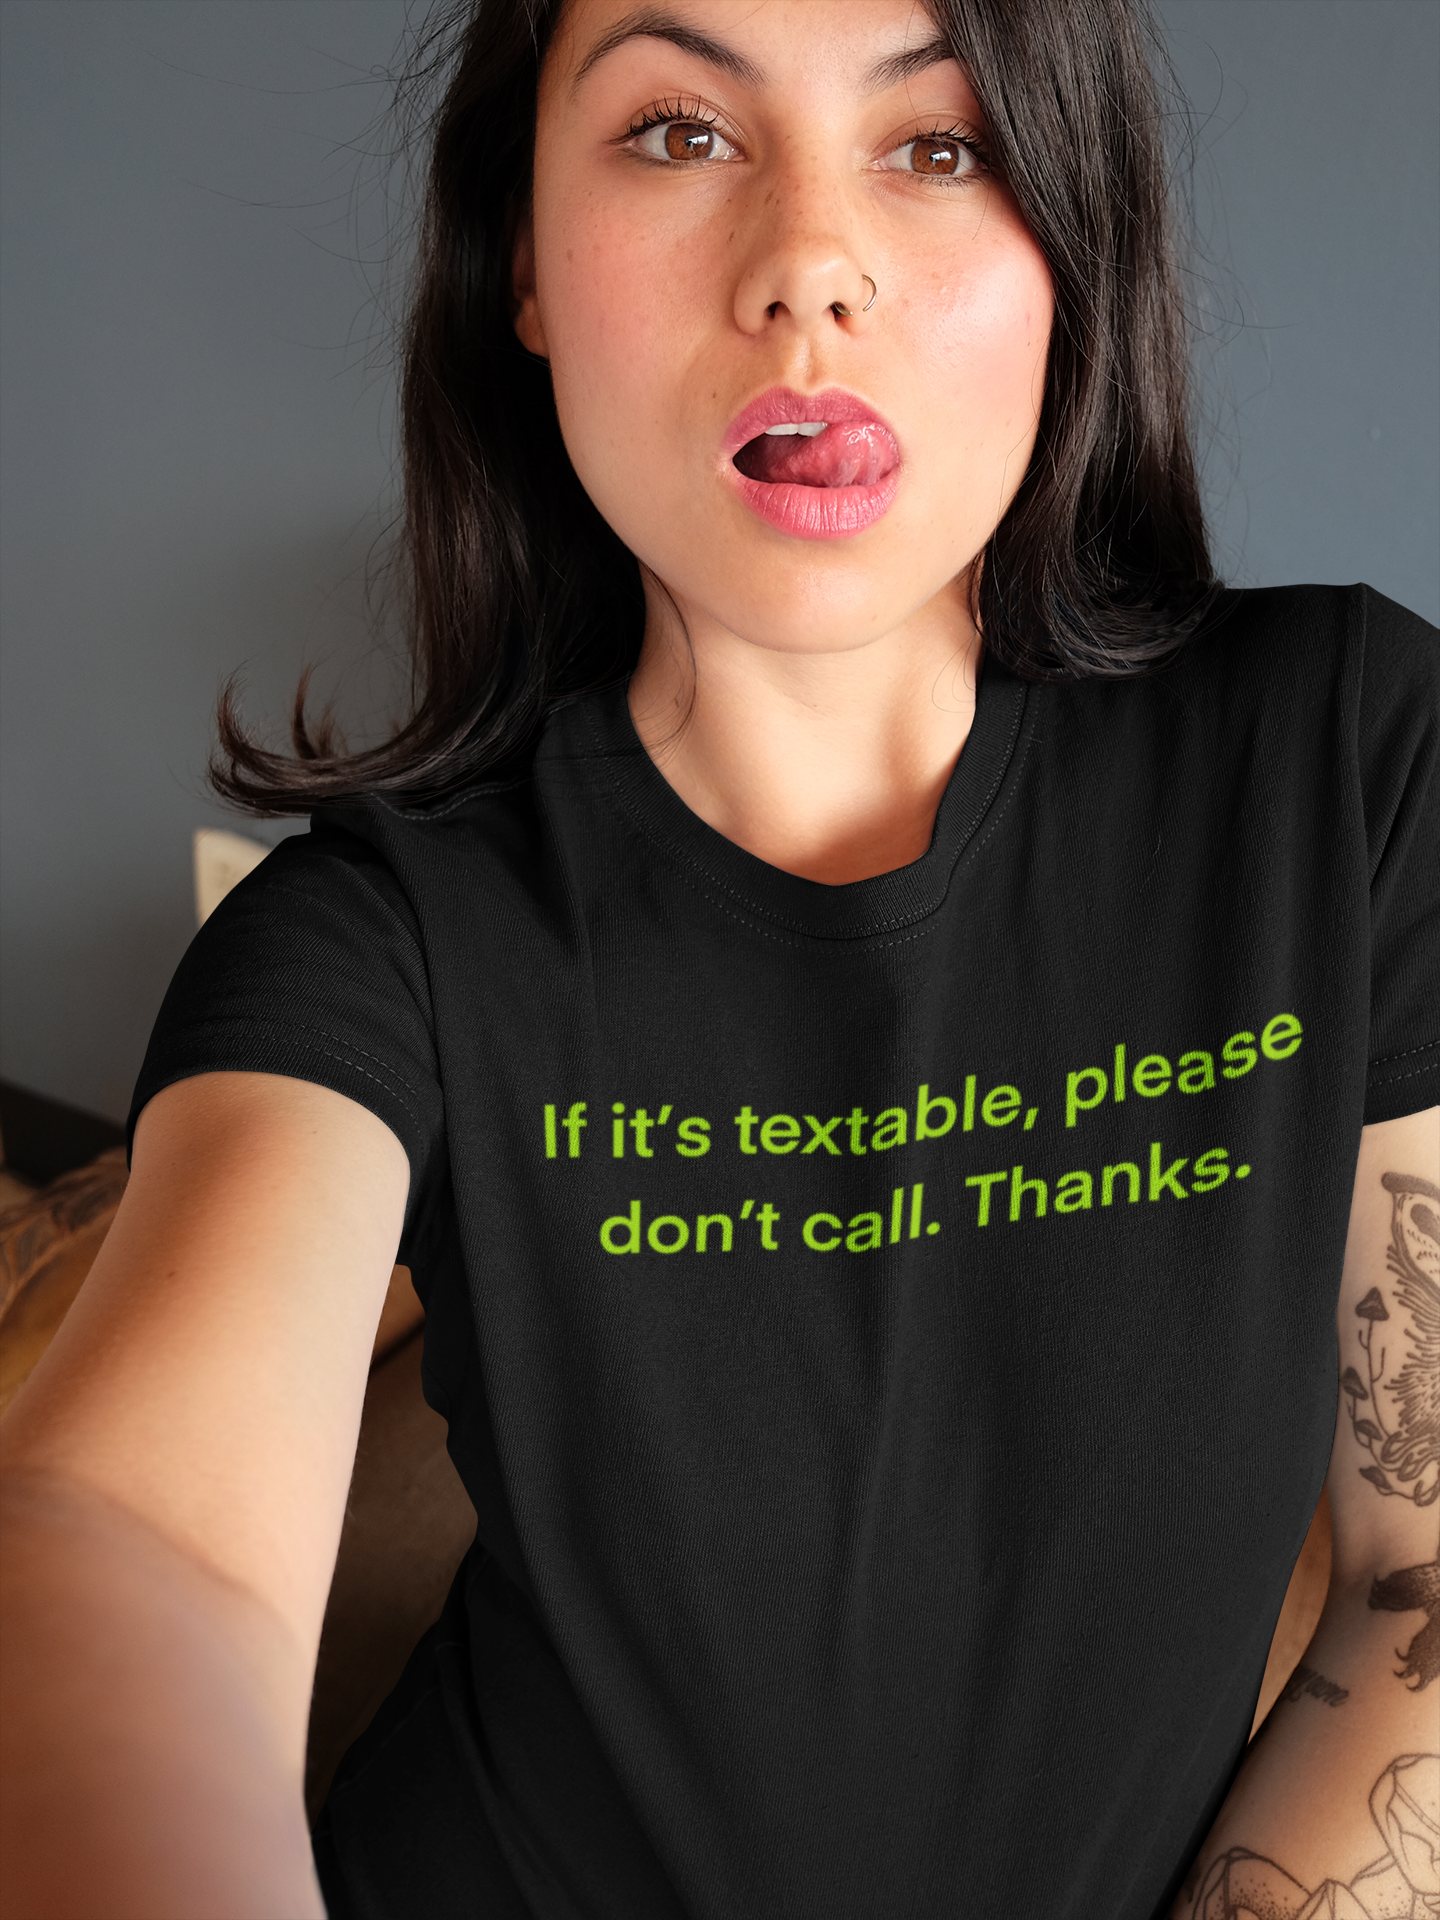 If it's textable please don't call. Thanks. Slogan T-shirt